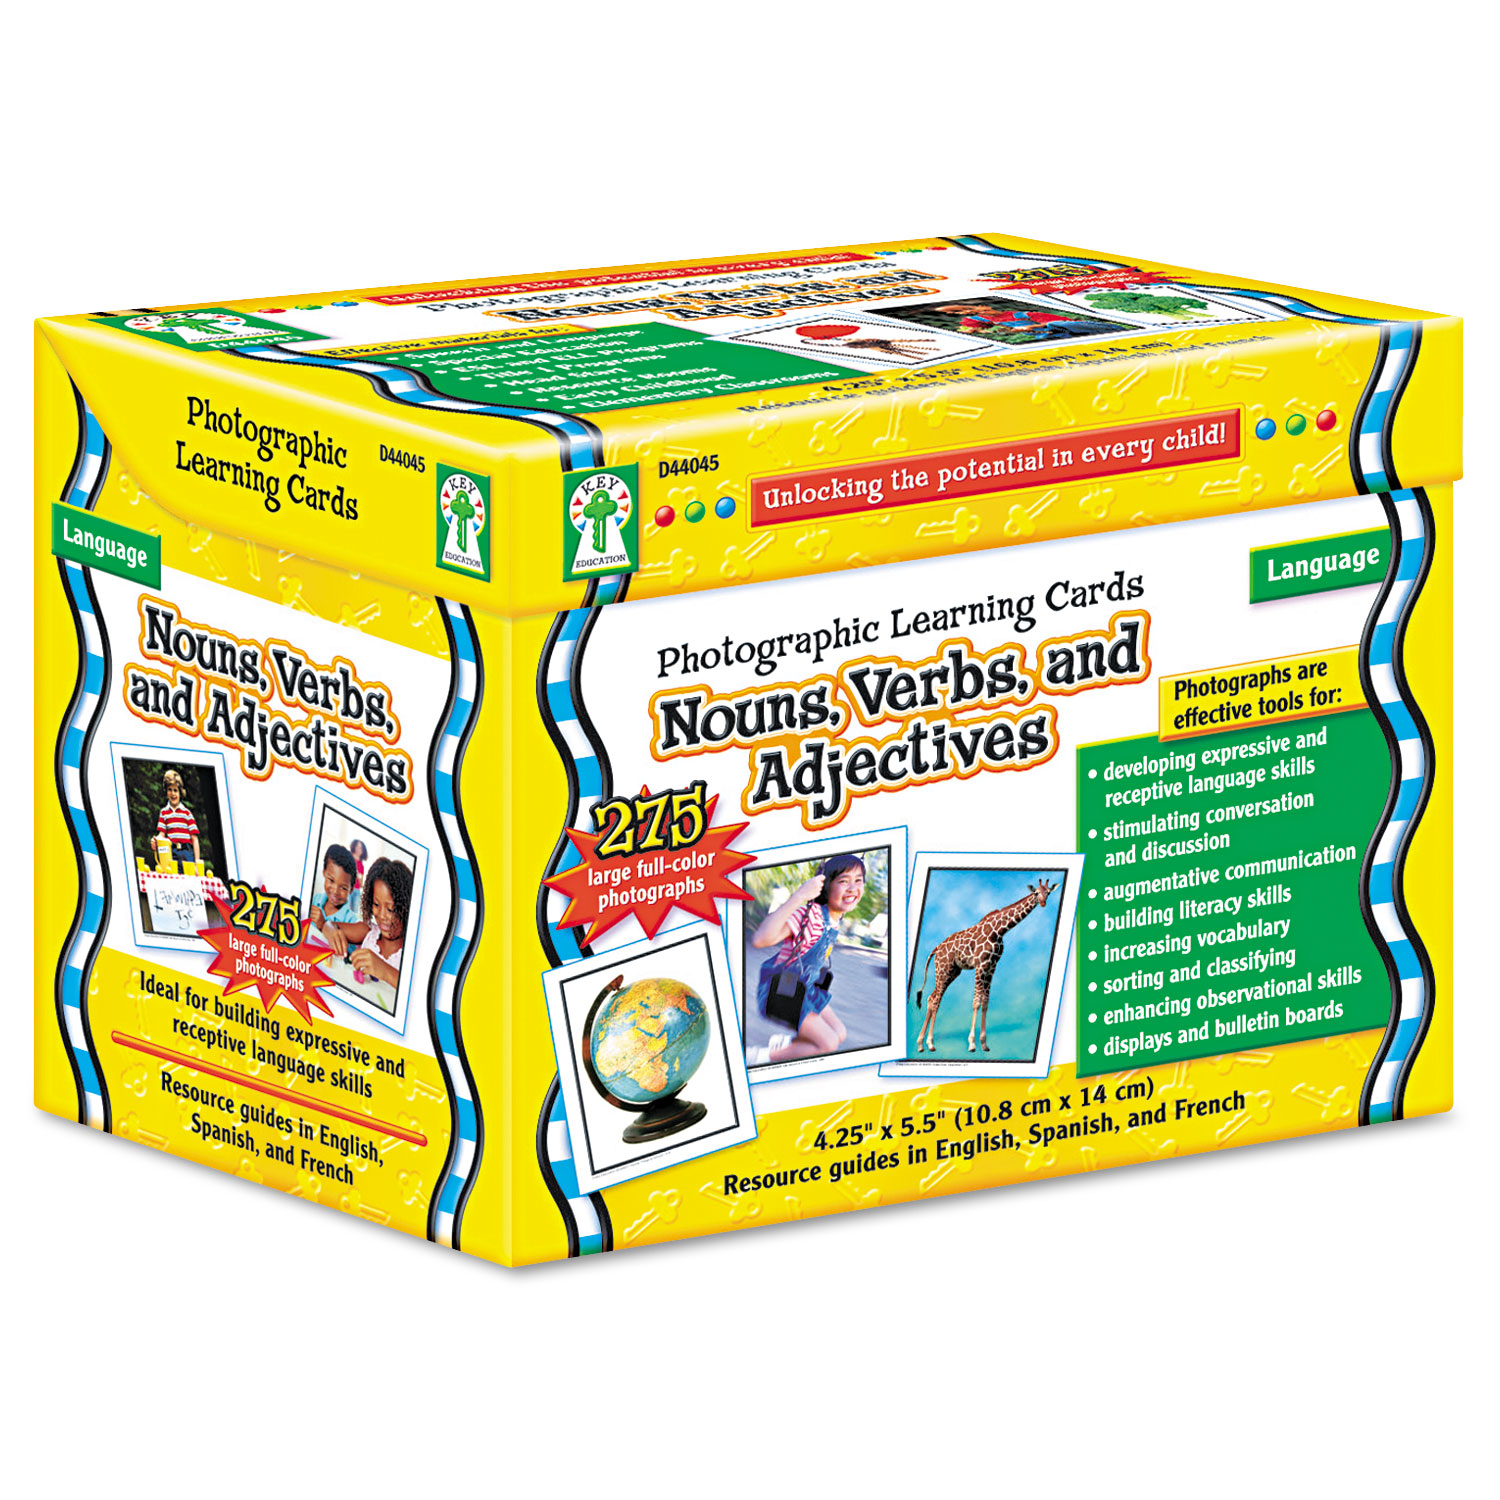 Photographic Learning Cards Boxed Set, Nouns/Verbs/Adjectives, Grades K-12